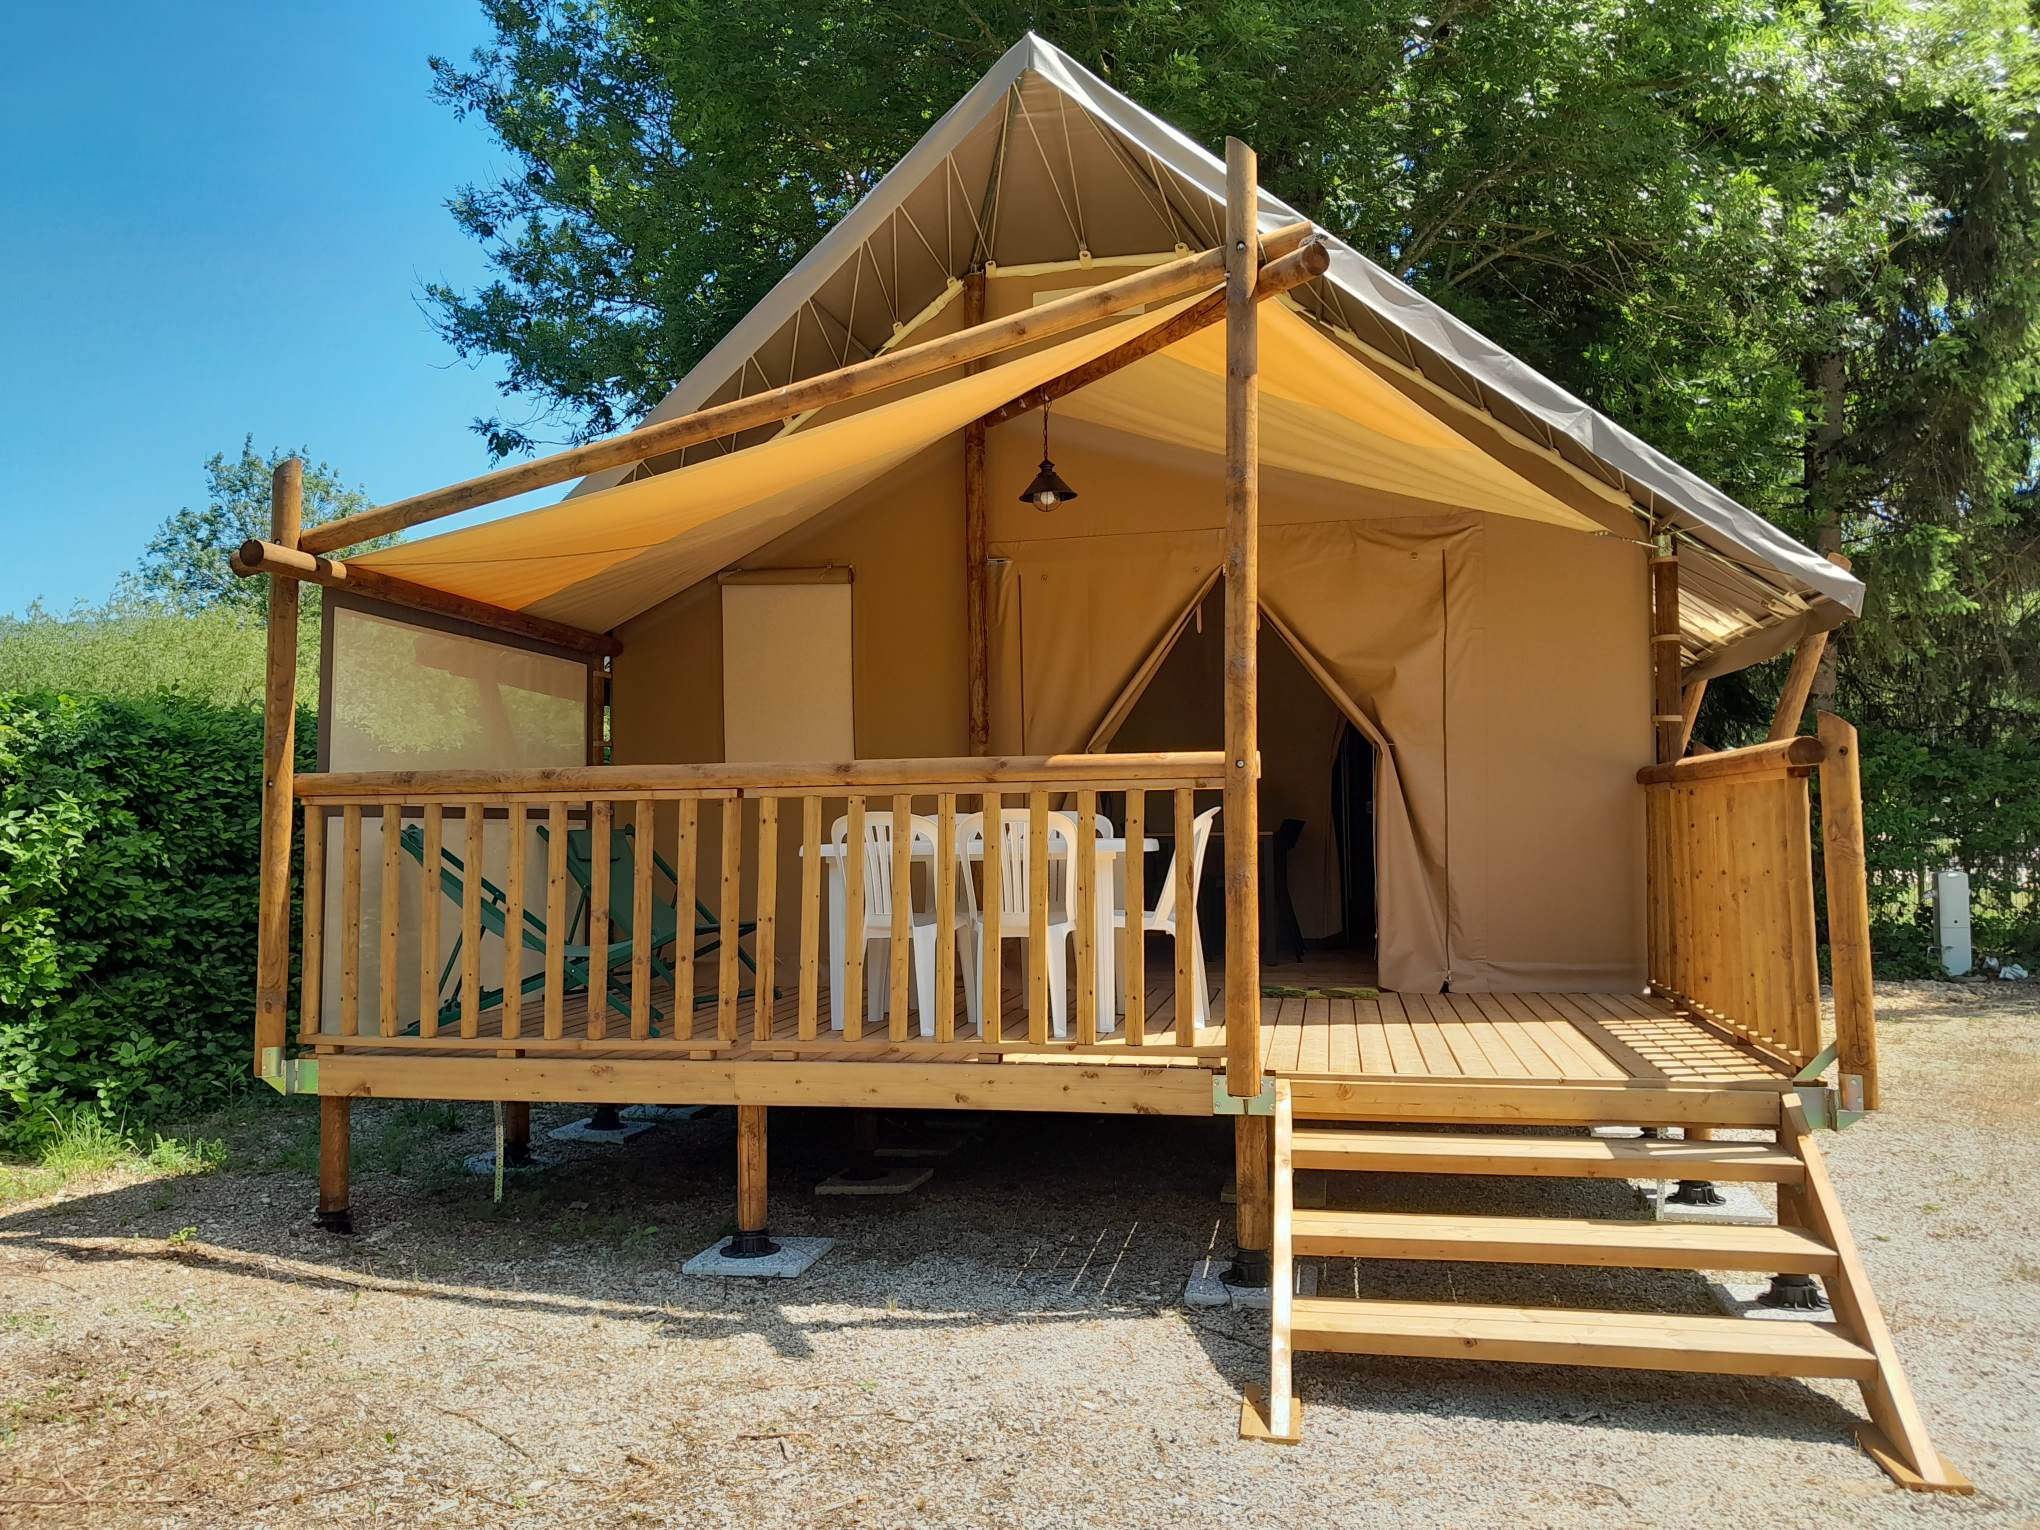 Huuraccommodatie - Jungle Lodge - Camping Le Colombier